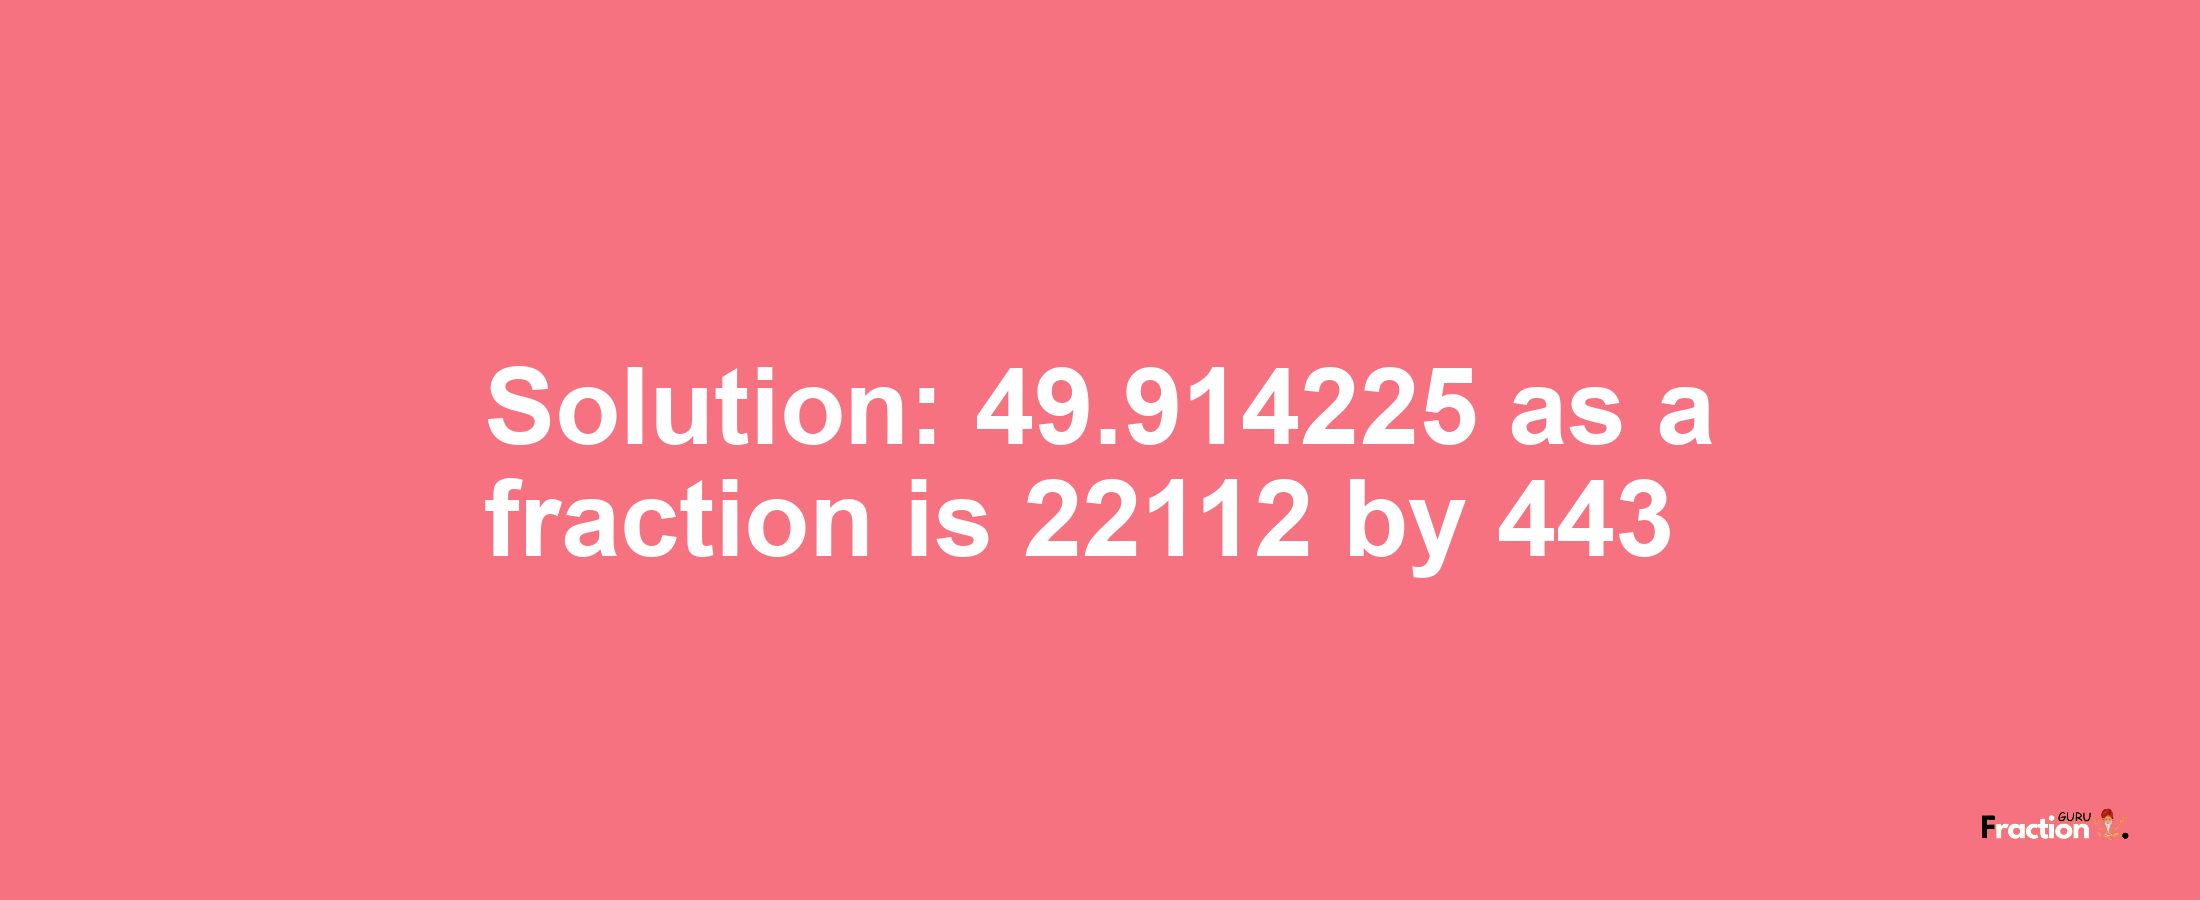 Solution:49.914225 as a fraction is 22112/443